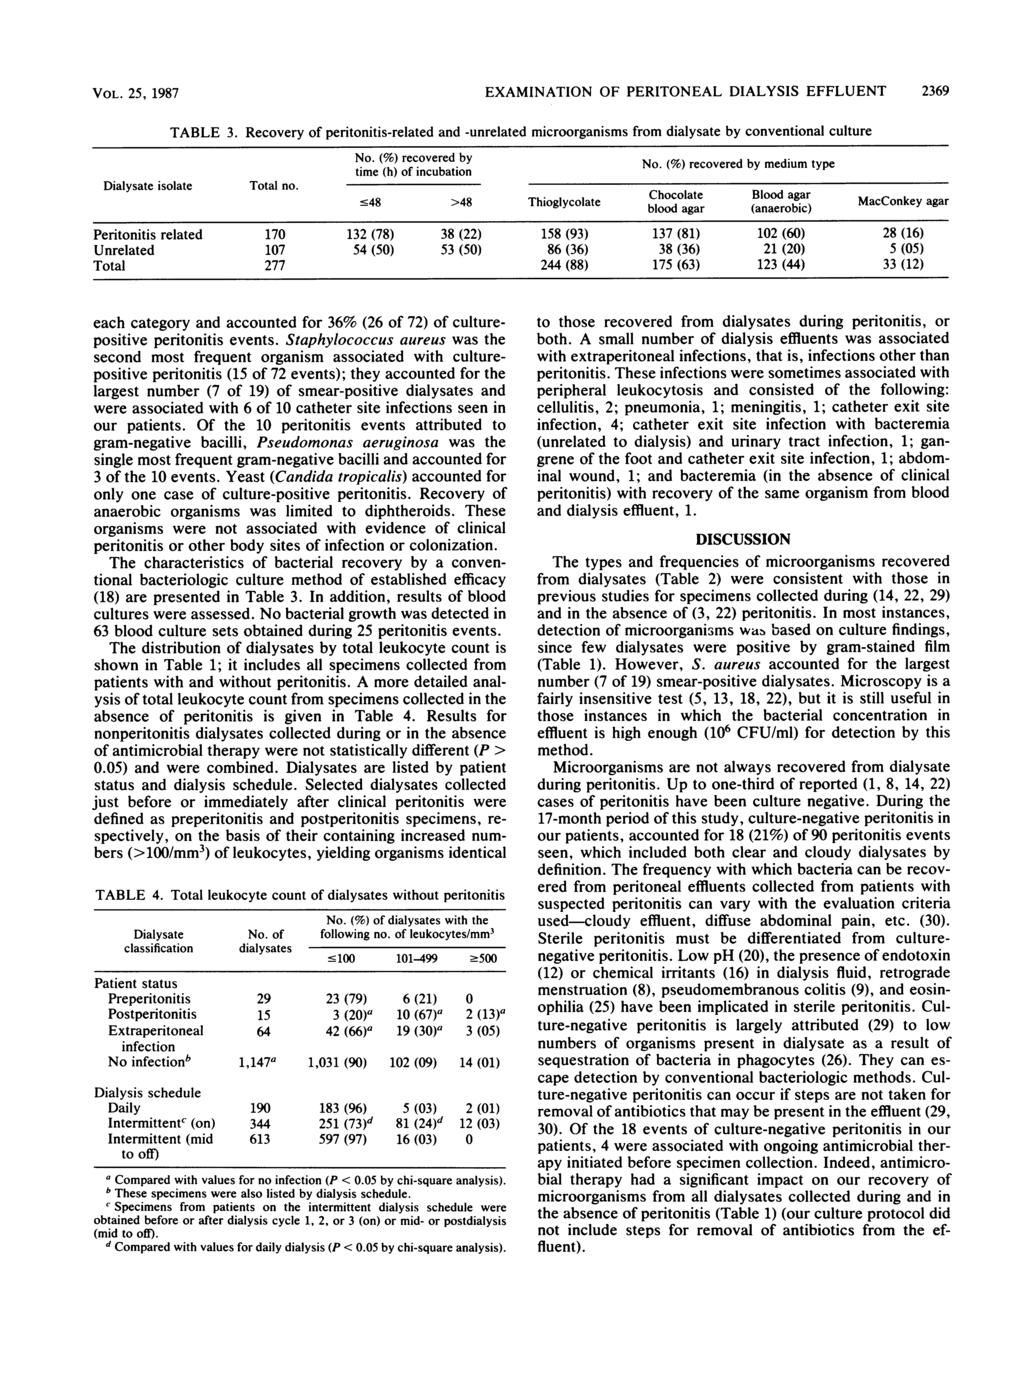 VOL. 25, 1987 EXAMINATION OF PERITONEAL DIALYSIS EFFLUENT 2369 Dilyste isolte TABLE 3. Recovery of peritonitis-relted nd -unrelted microorgnisms from dilyste by conventionl culture Totl no. No.